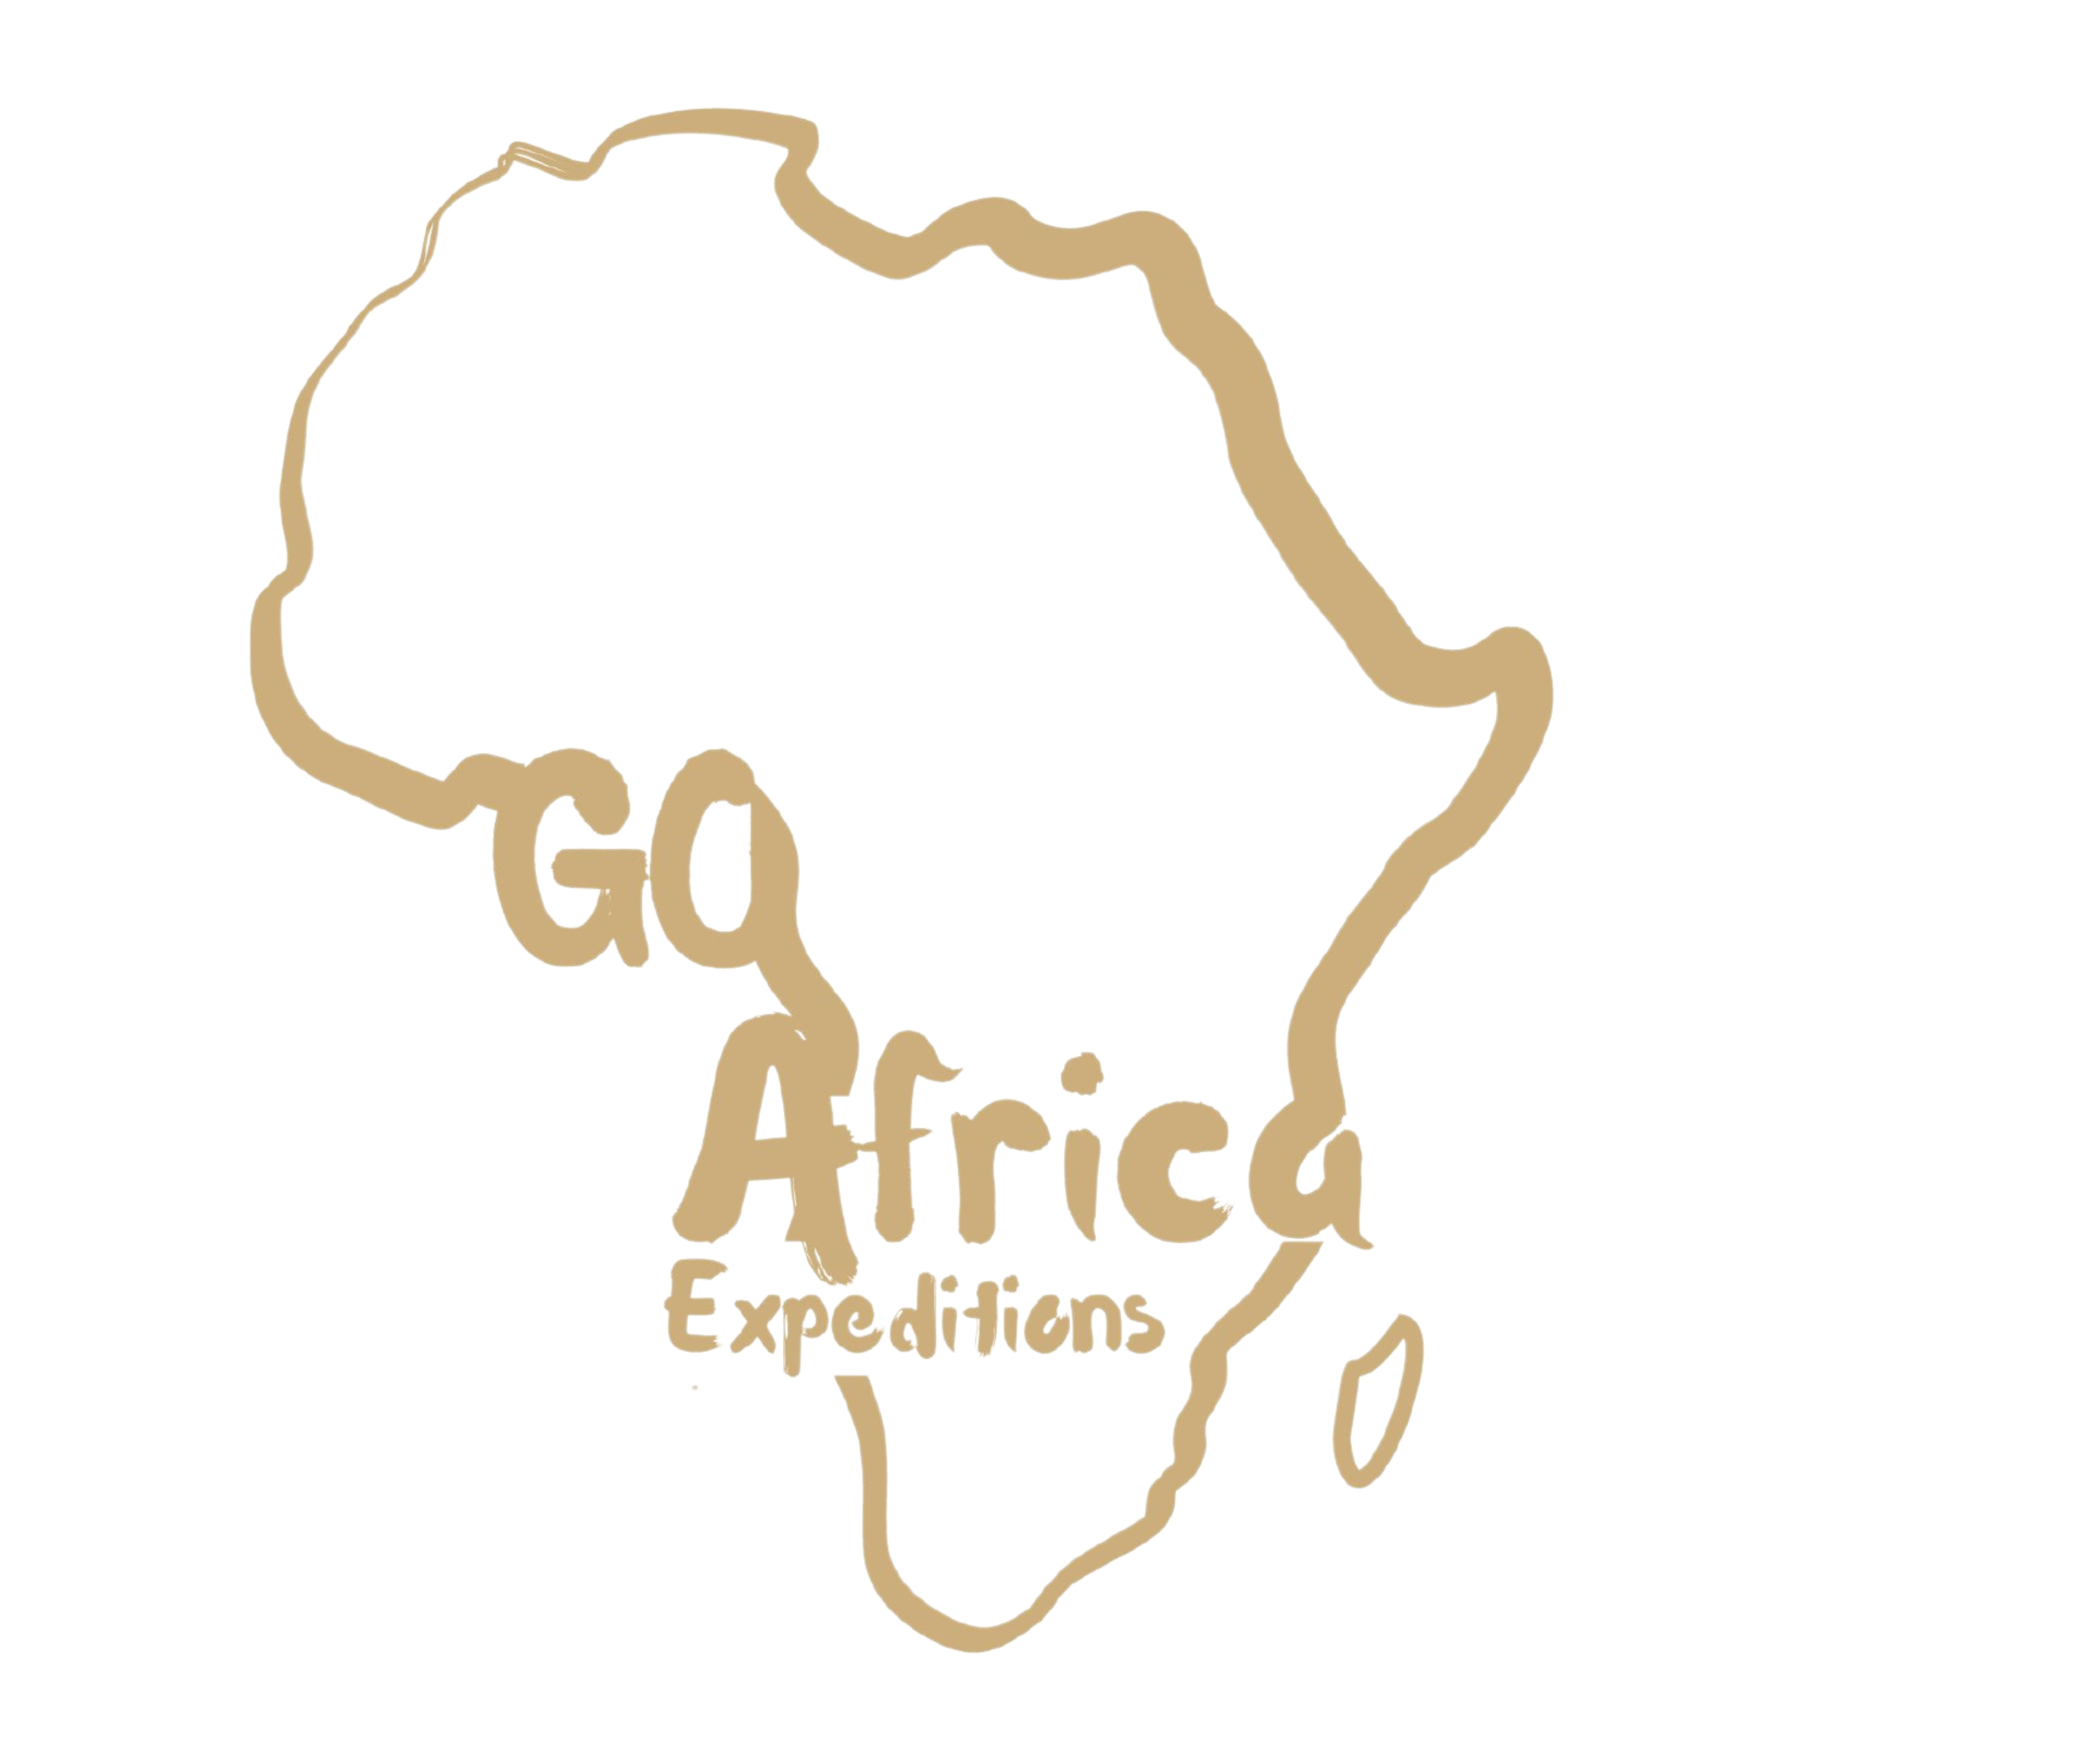 GoAfrica Expeditions